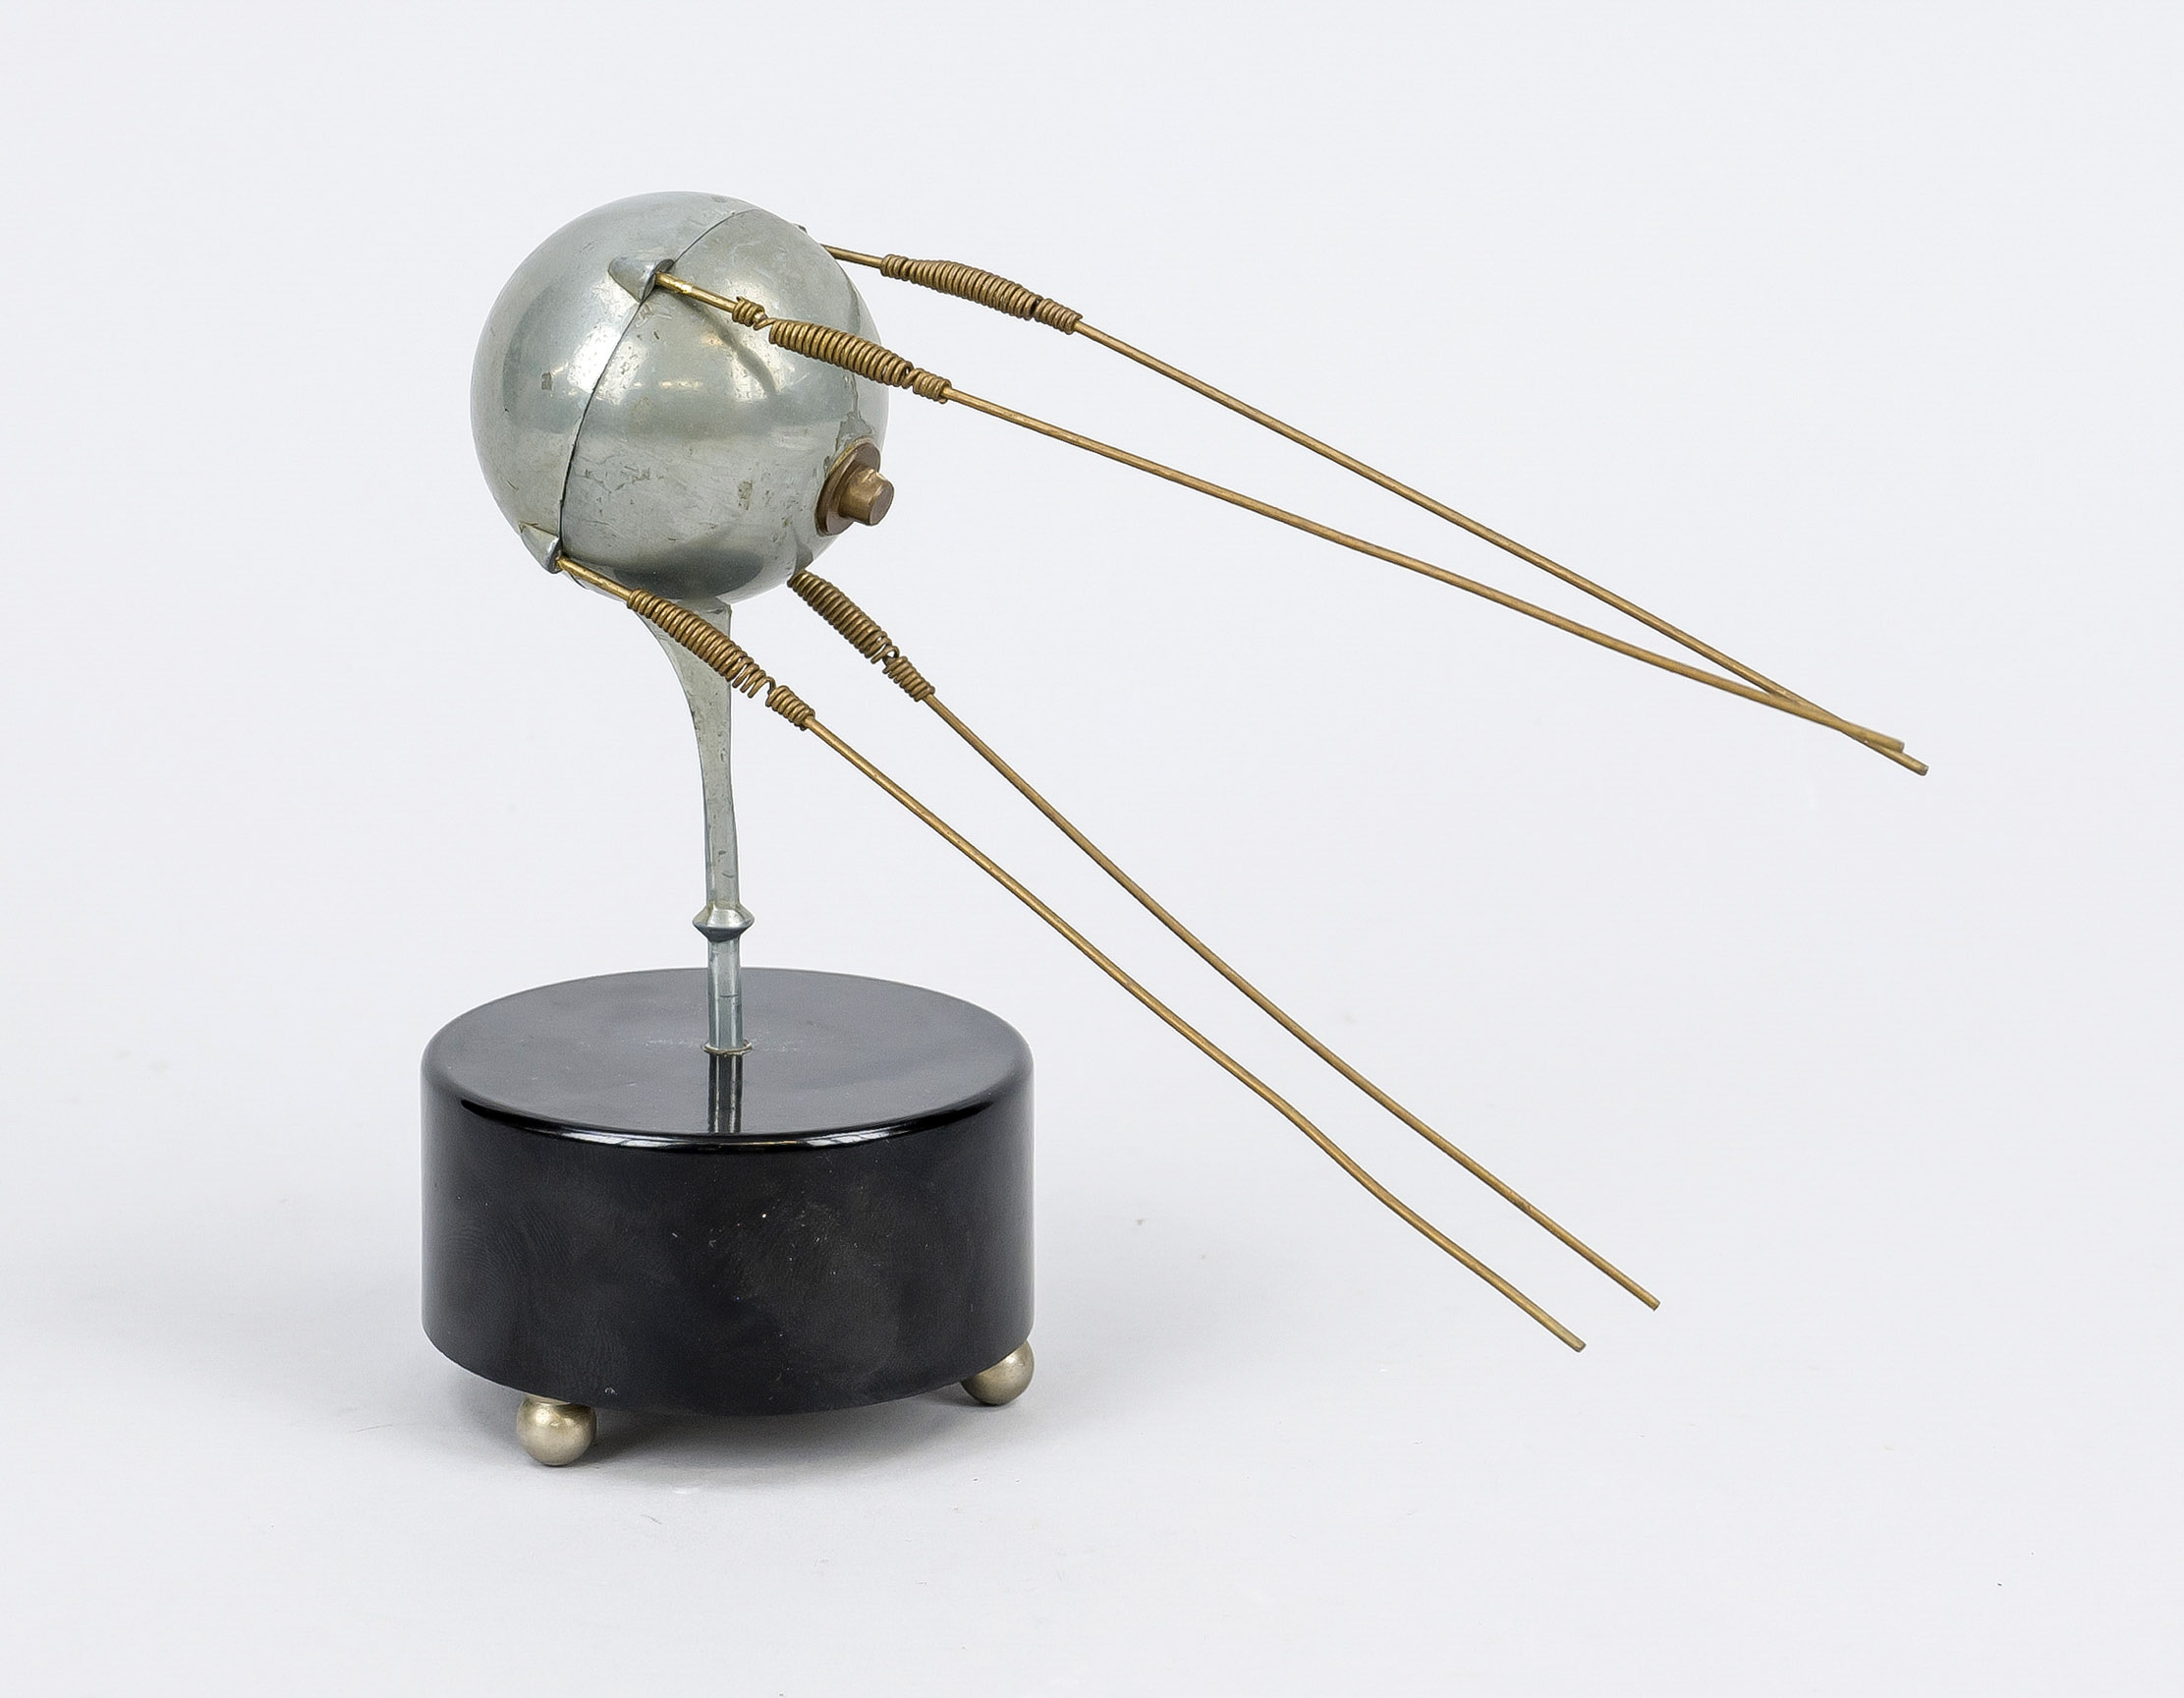 Model of the Sputnik, 2nd half 20th century, hollow metal ball with 4 metal rods on movable metal